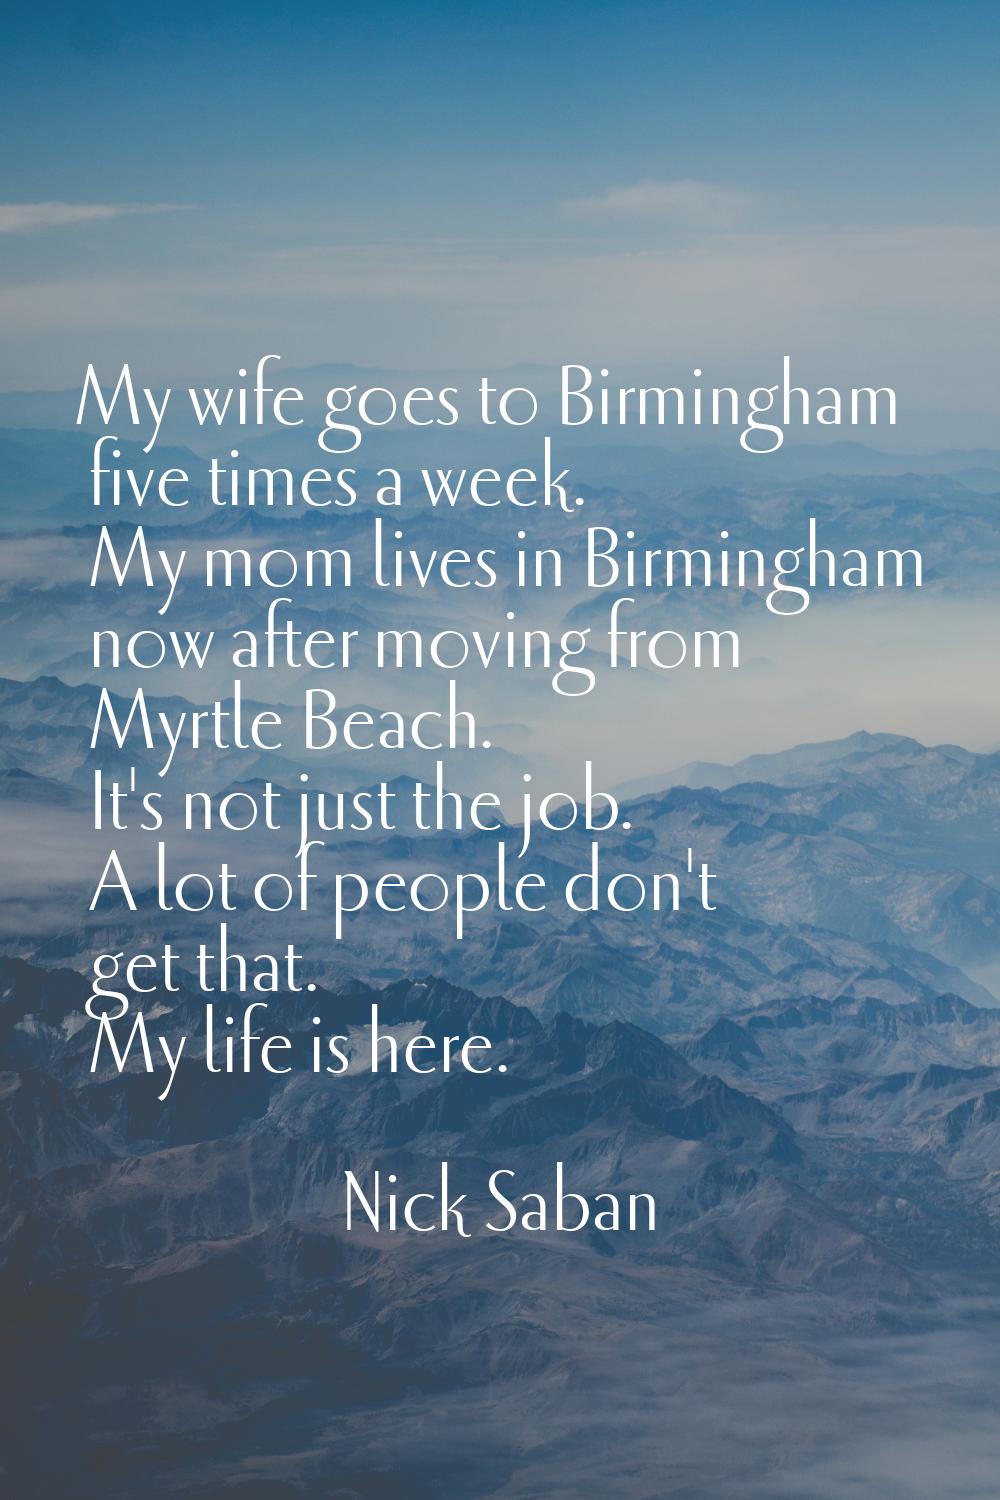 My wife goes to Birmingham five times a week. My mom lives in Birmingham now after moving from Myrt